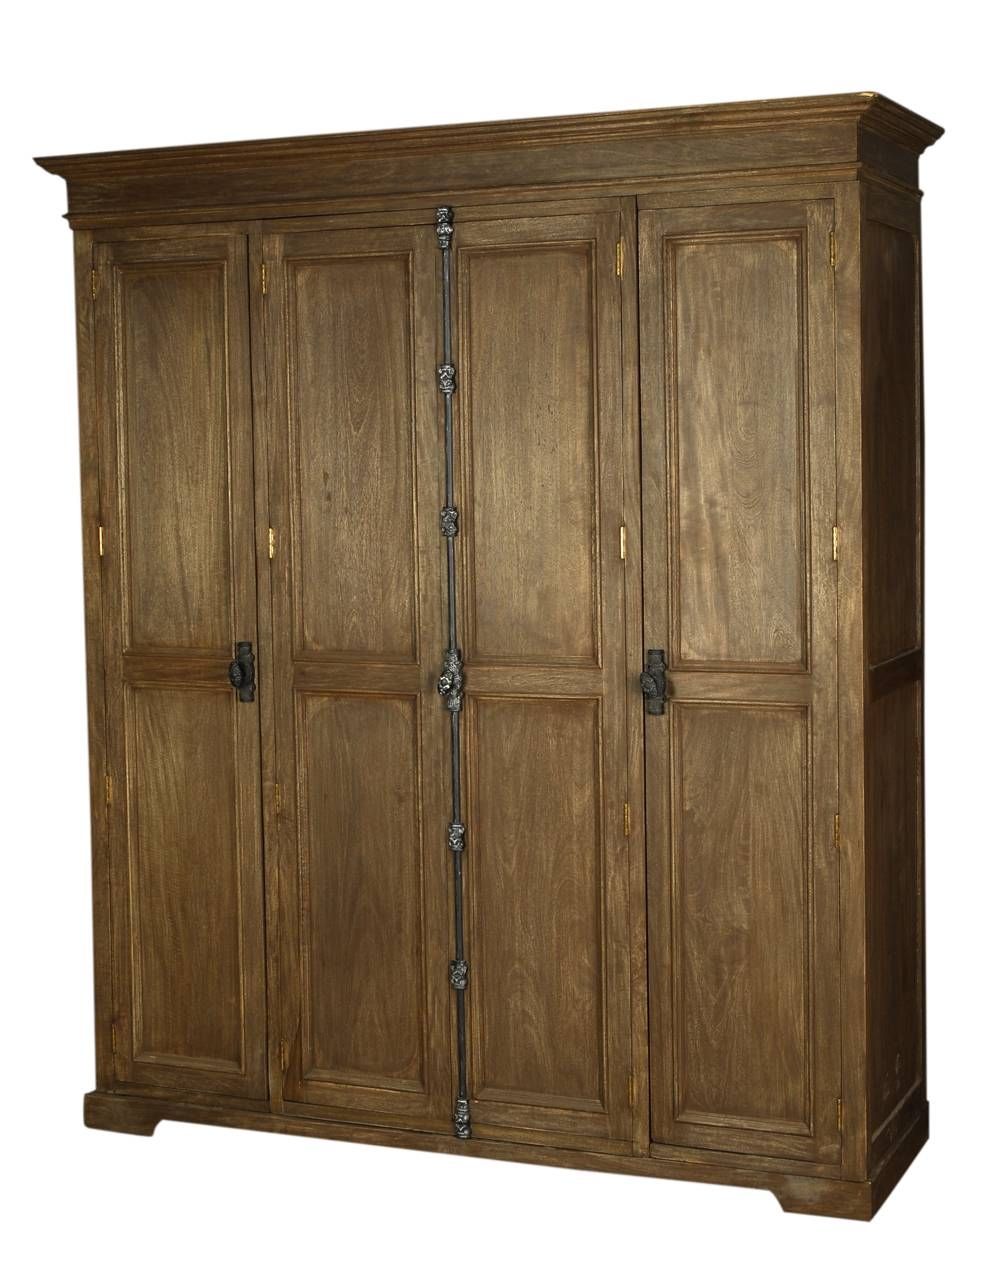 Buy Solid Wooden Wardrobes Online In India  Fabindia Within Wooden Wardrobes (View 2 of 15)